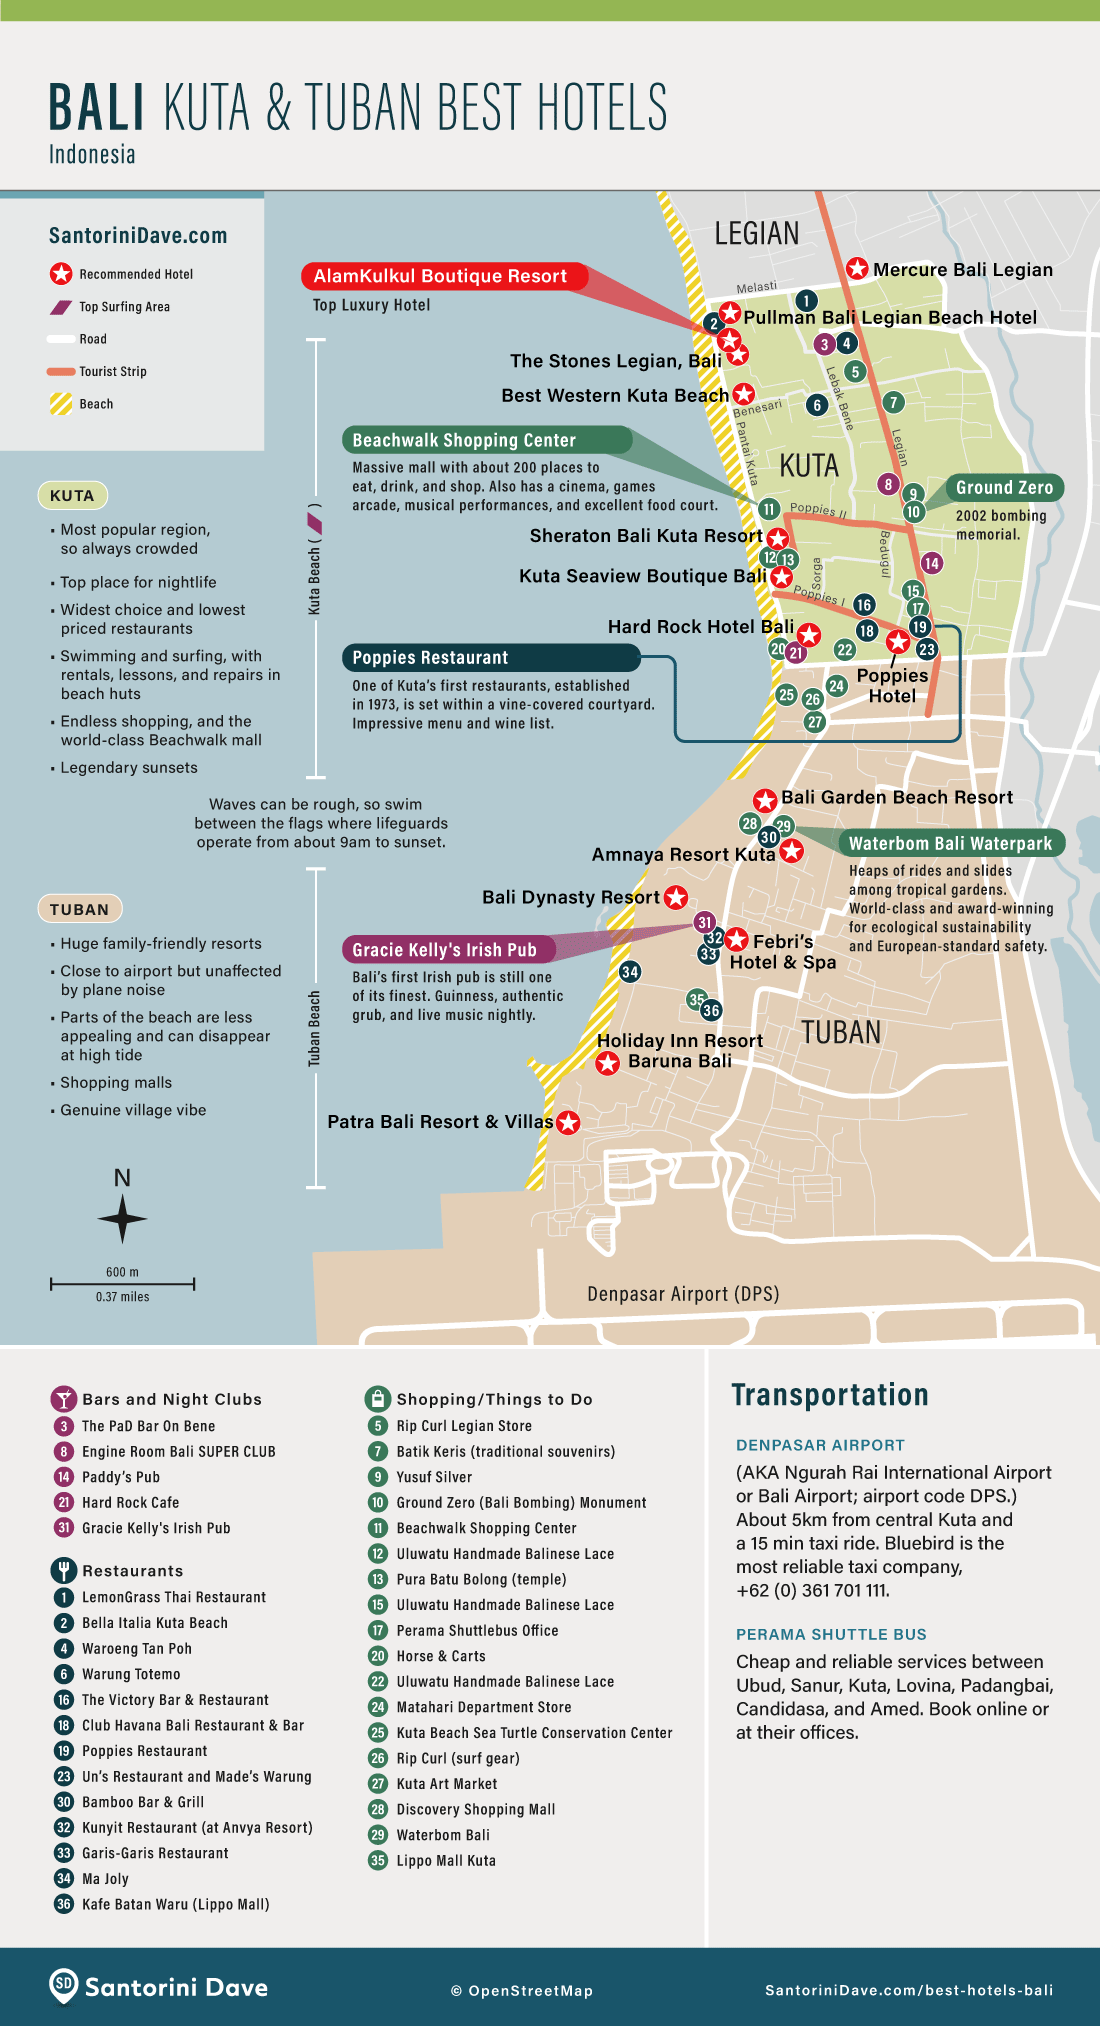 Map of the best hotels in Kuta and Tuban, Bali